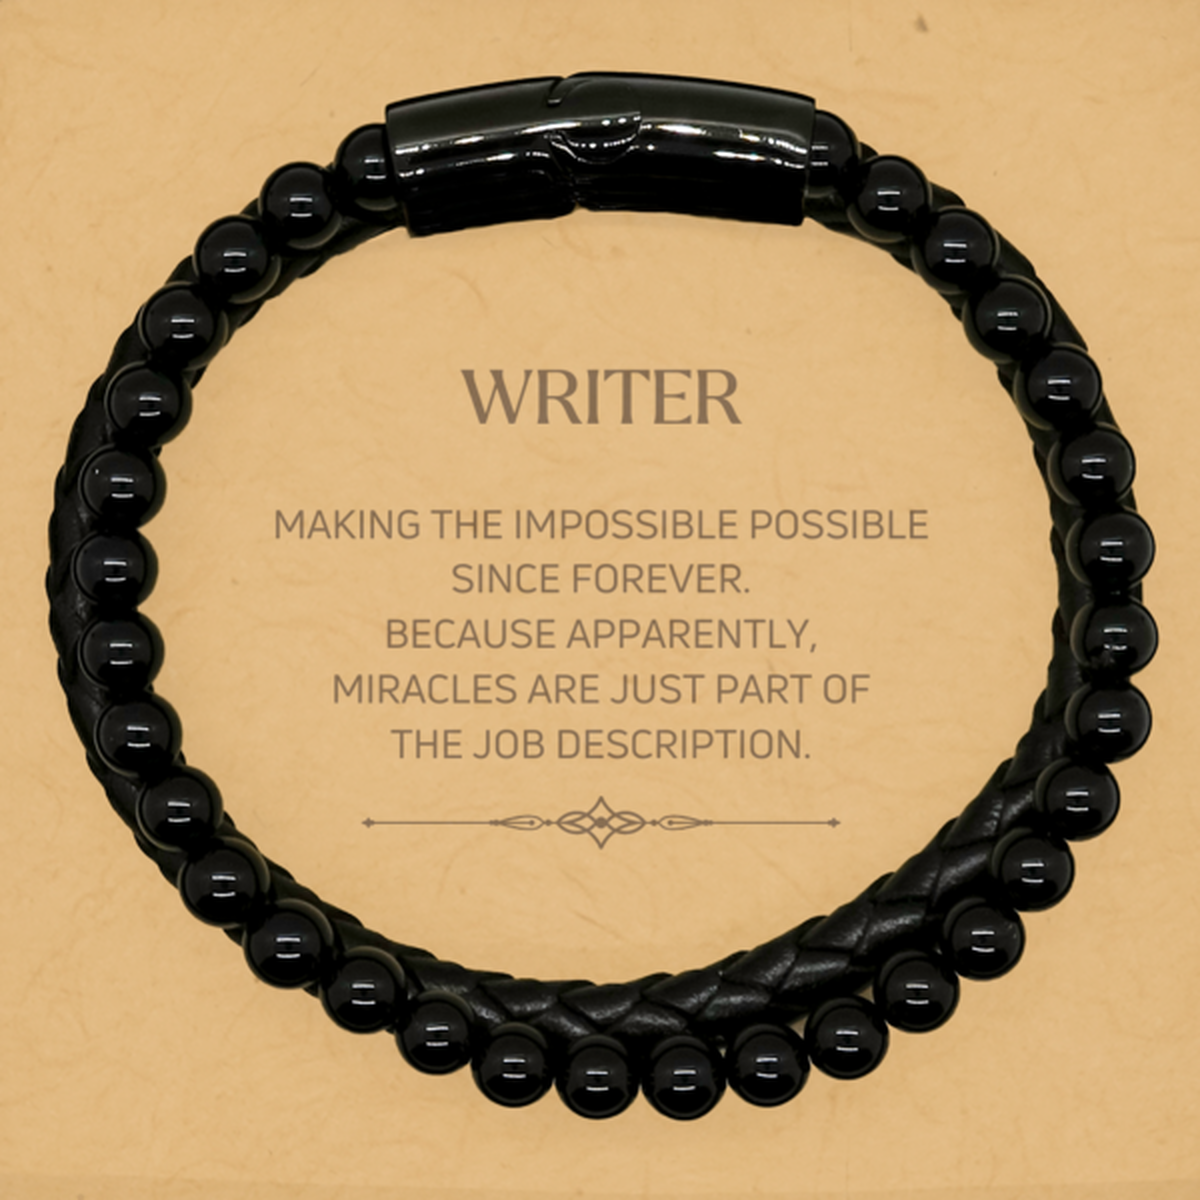 Funny Writer Gifts, Miracles are just part of the job description, Inspirational Birthday Stone Leather Bracelets For Writer, Men, Women, Coworkers, Friends, Boss